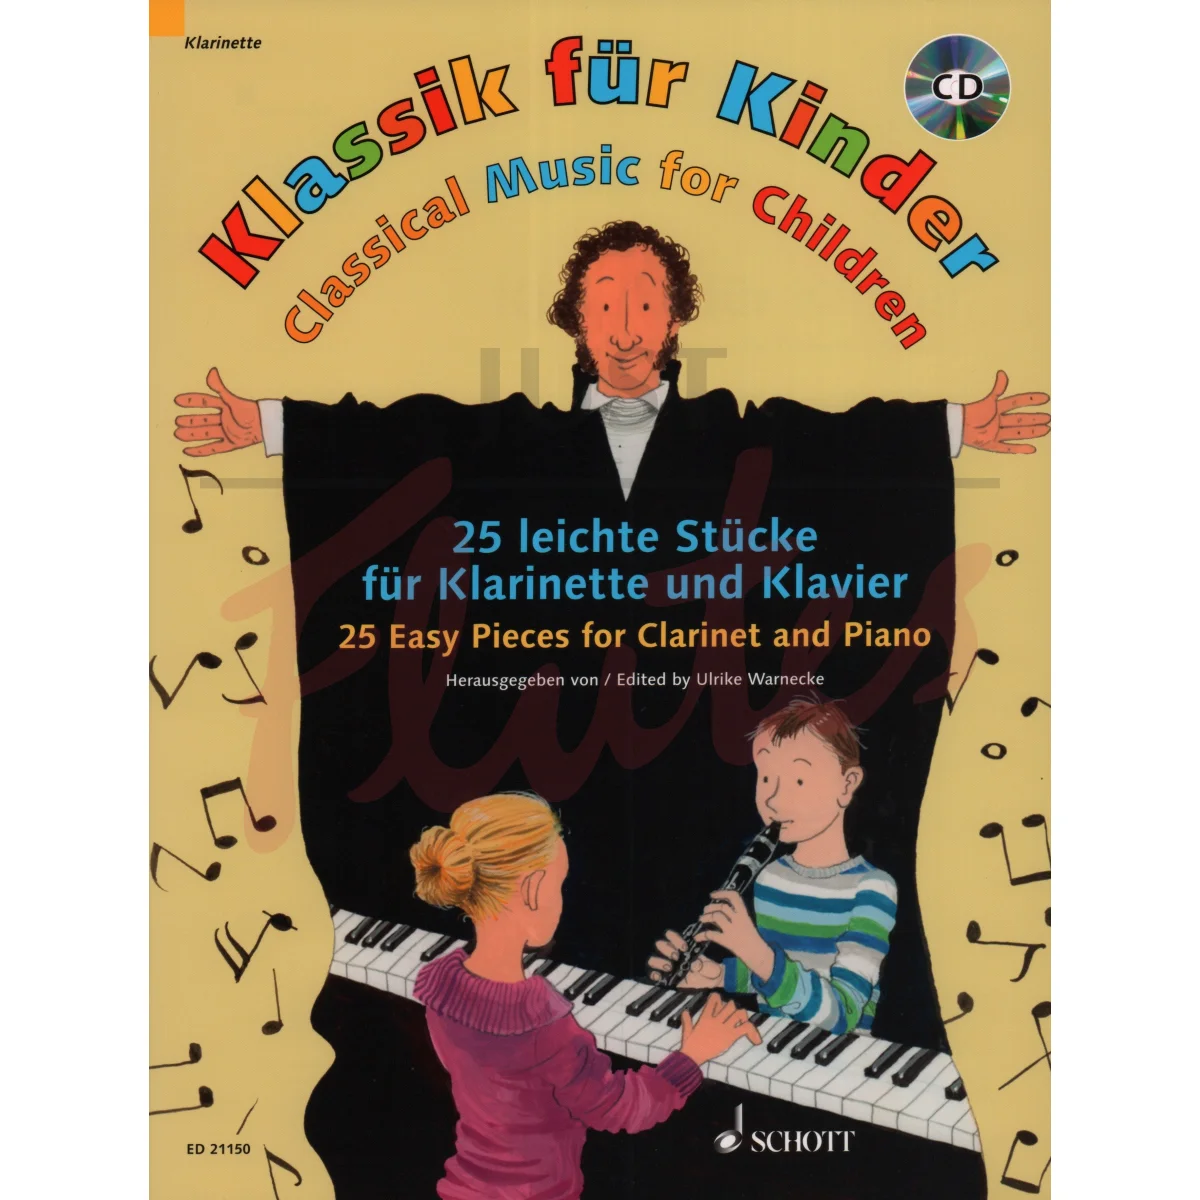 Classical Music for Children for Clarinet and Piano